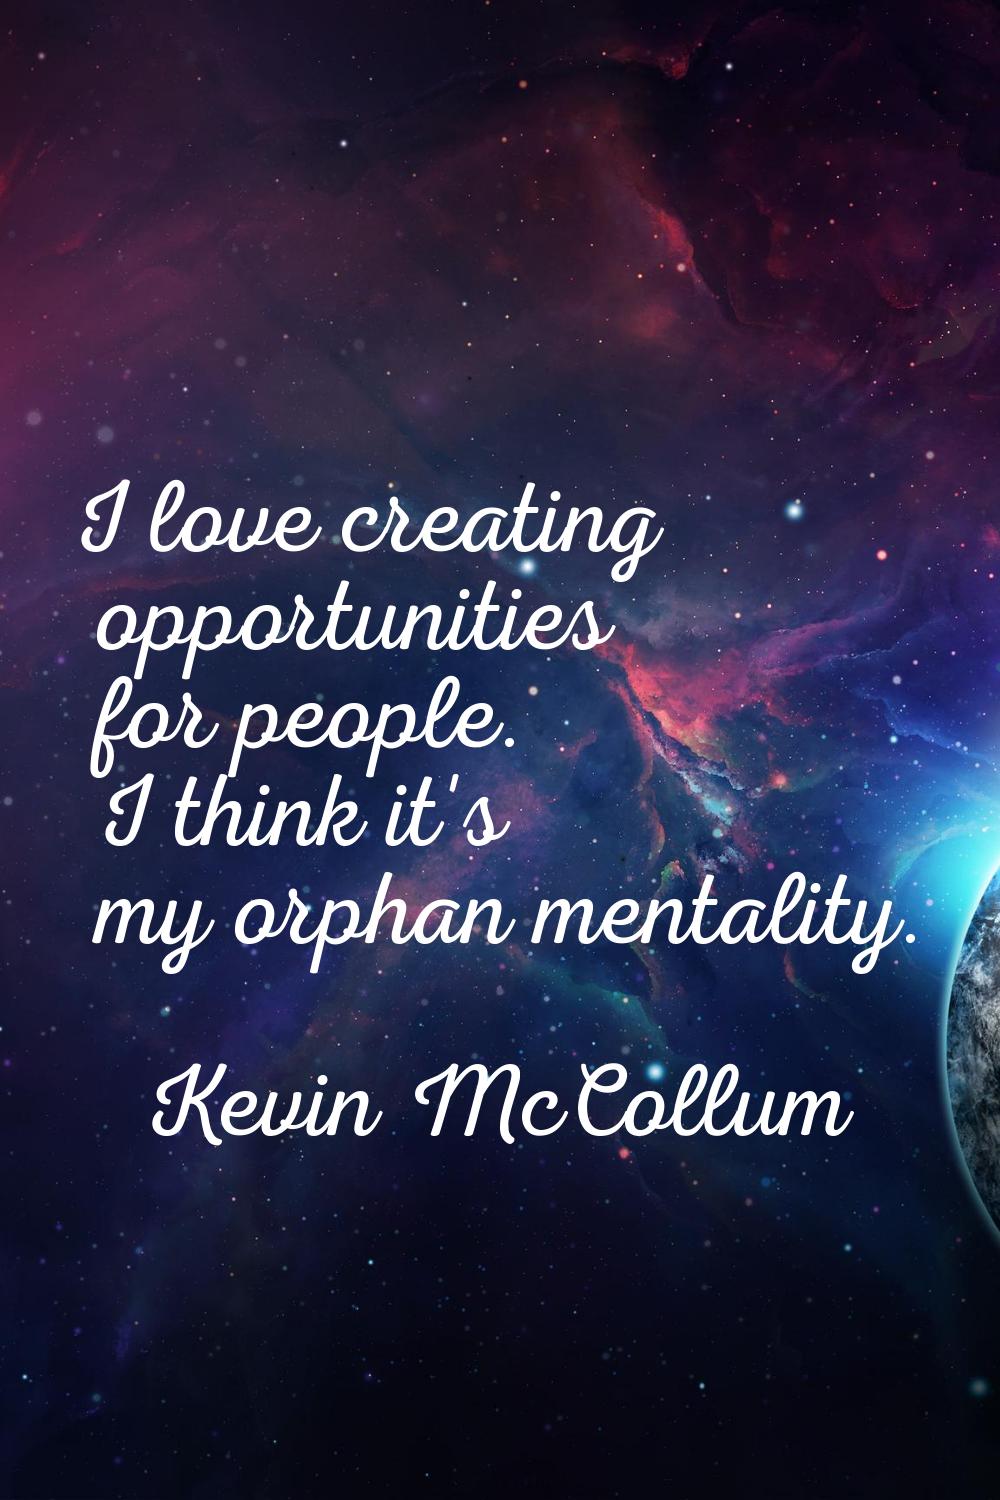 I love creating opportunities for people. I think it's my orphan mentality.